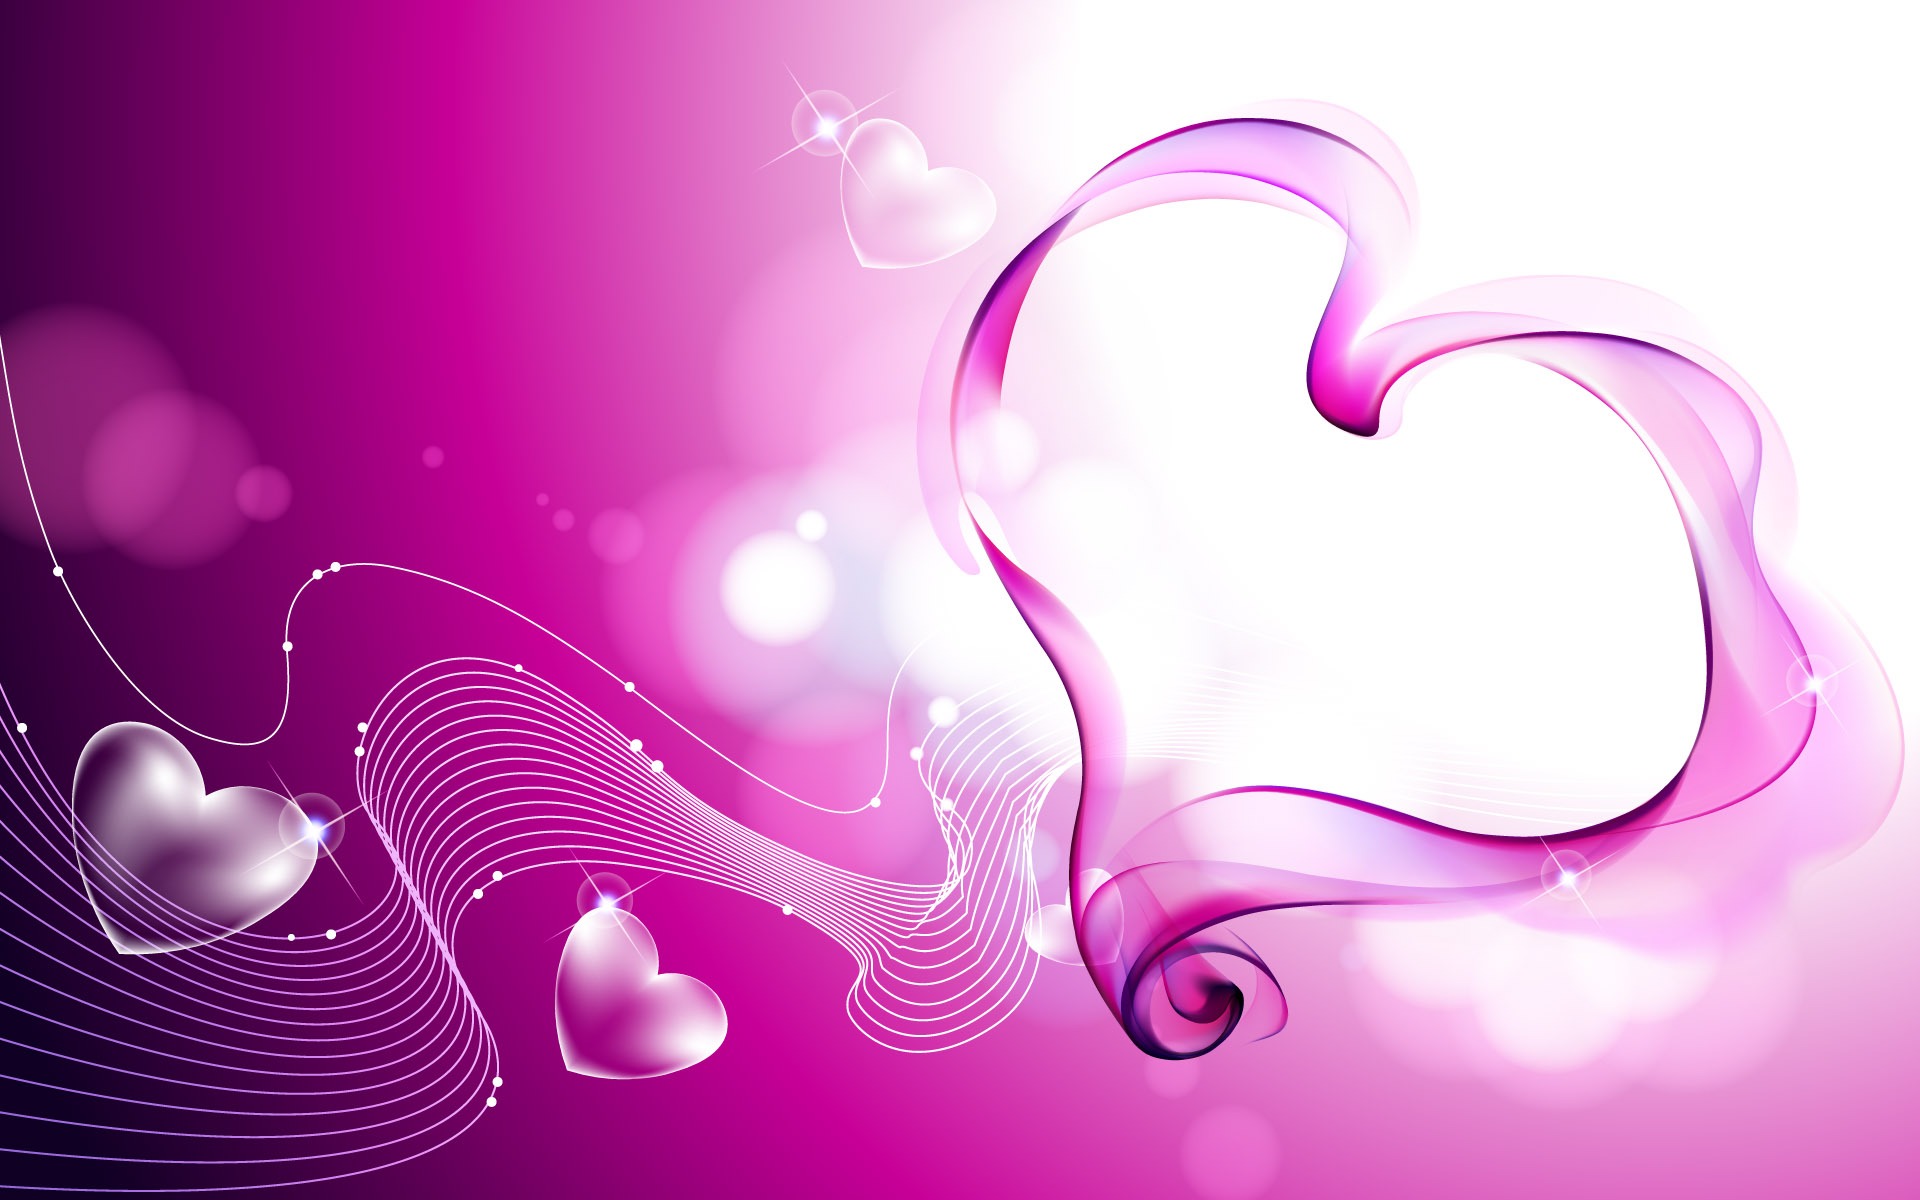 Valentine's Day Love Theme Wallpapers (3) #6 - 1920x1200